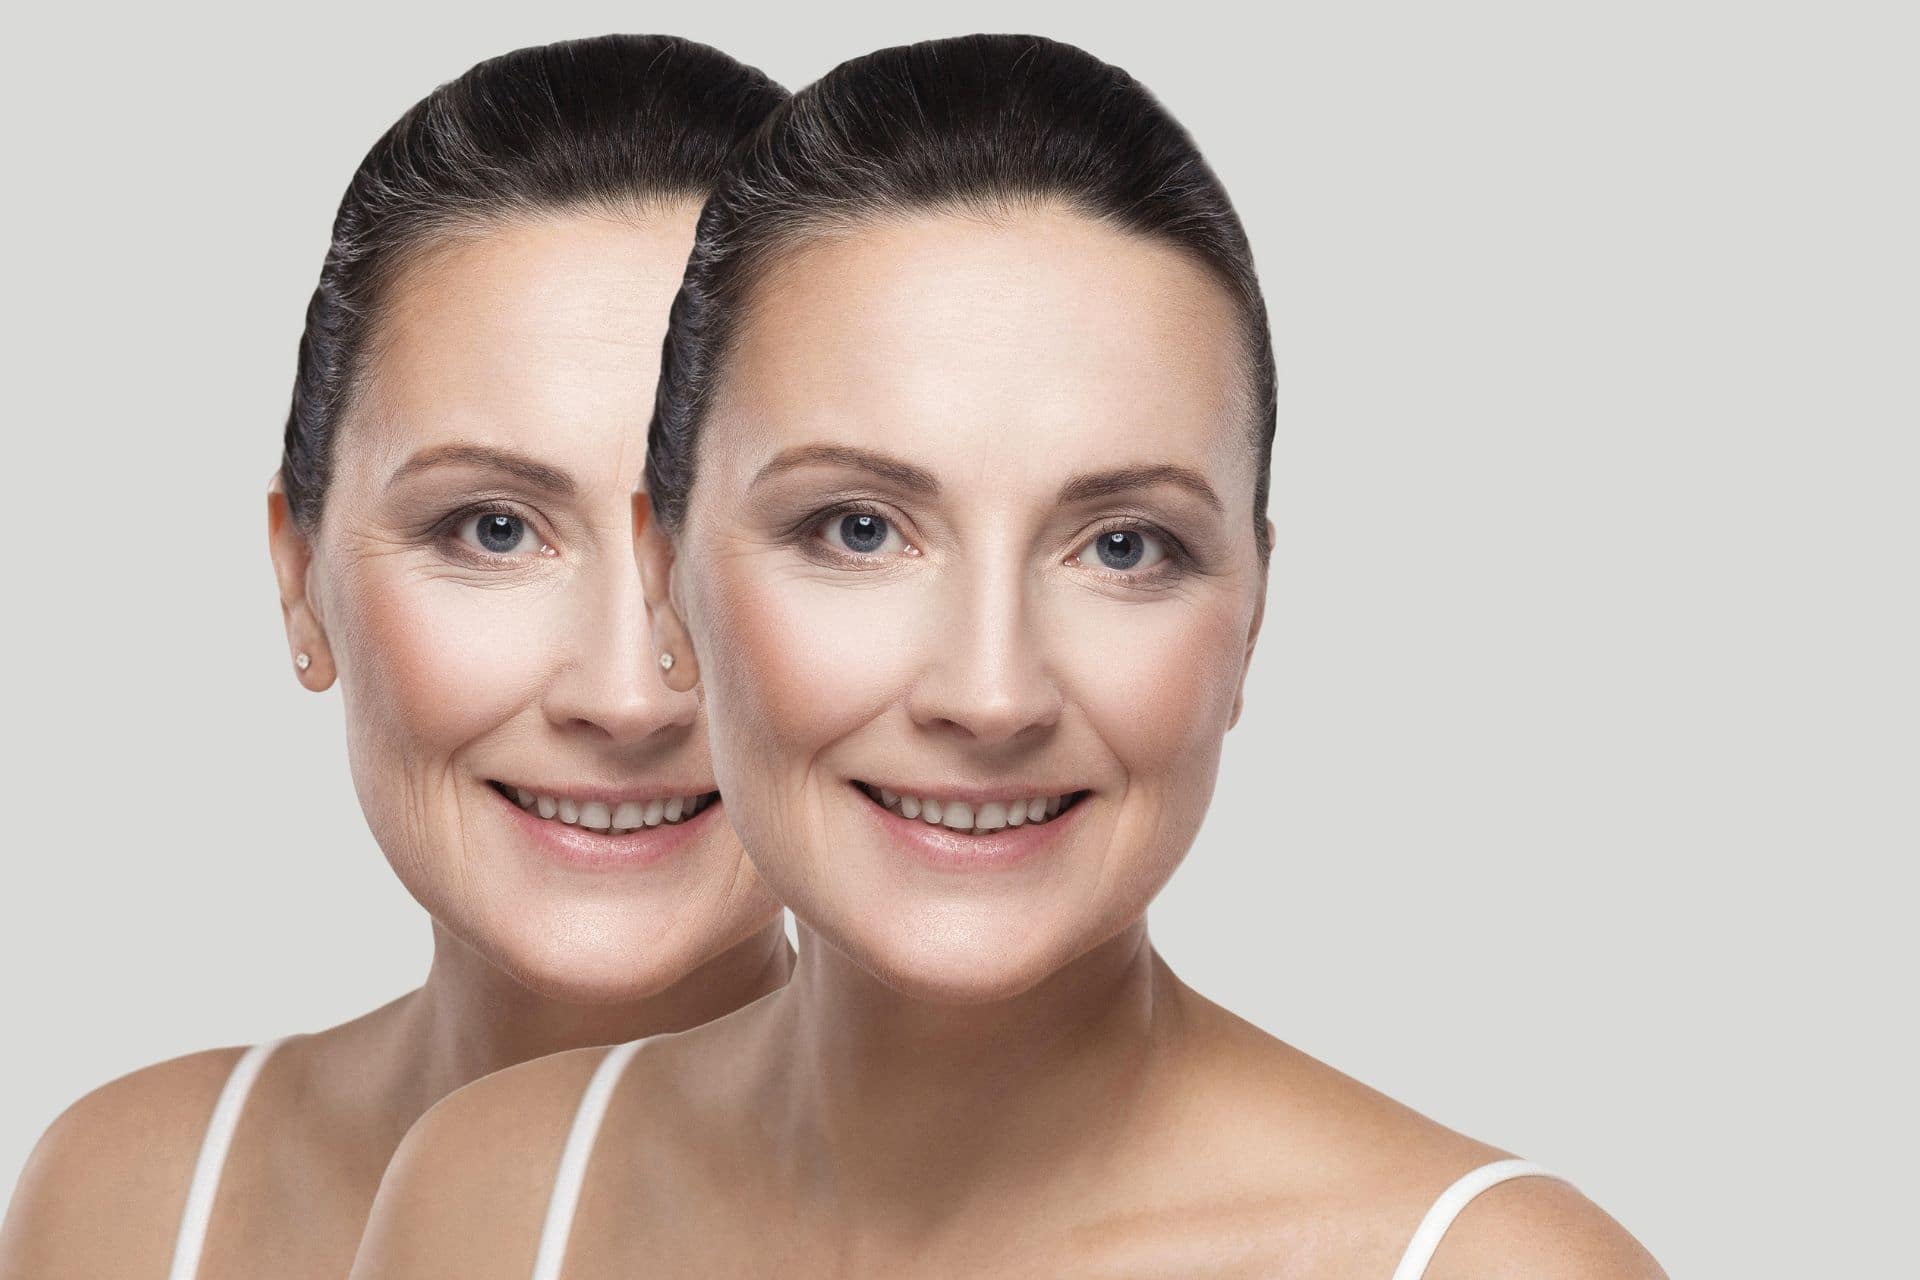 How Botox Works To Reduce The Appearance Of Wrinkles